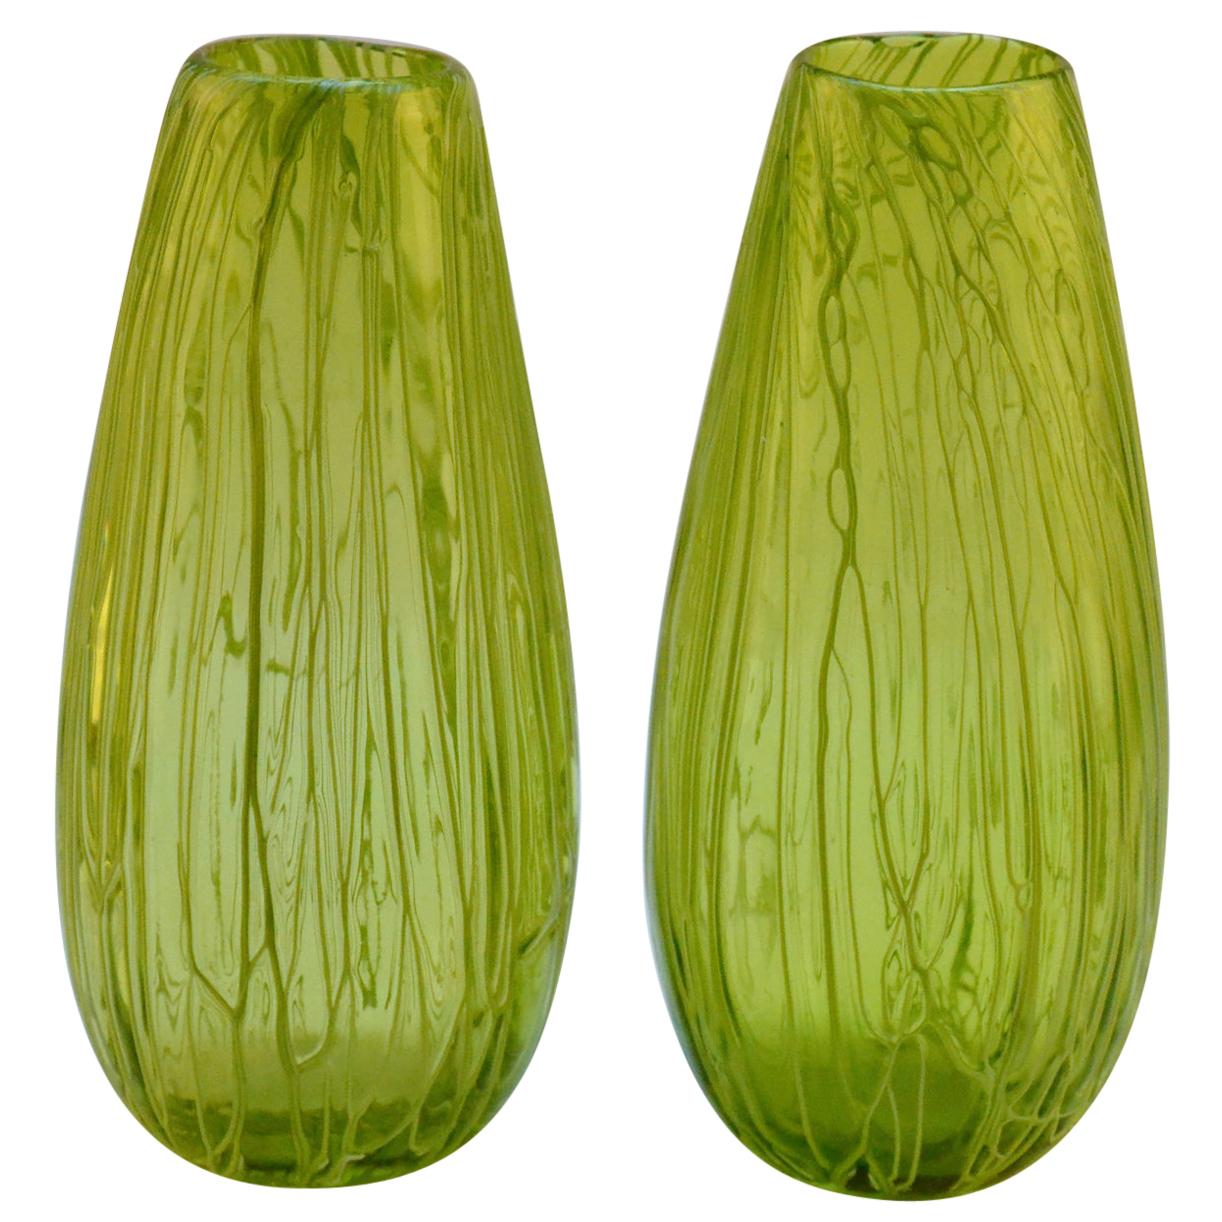 Pair of Hand Blown Glass Acid Green Veined Vases For Sale